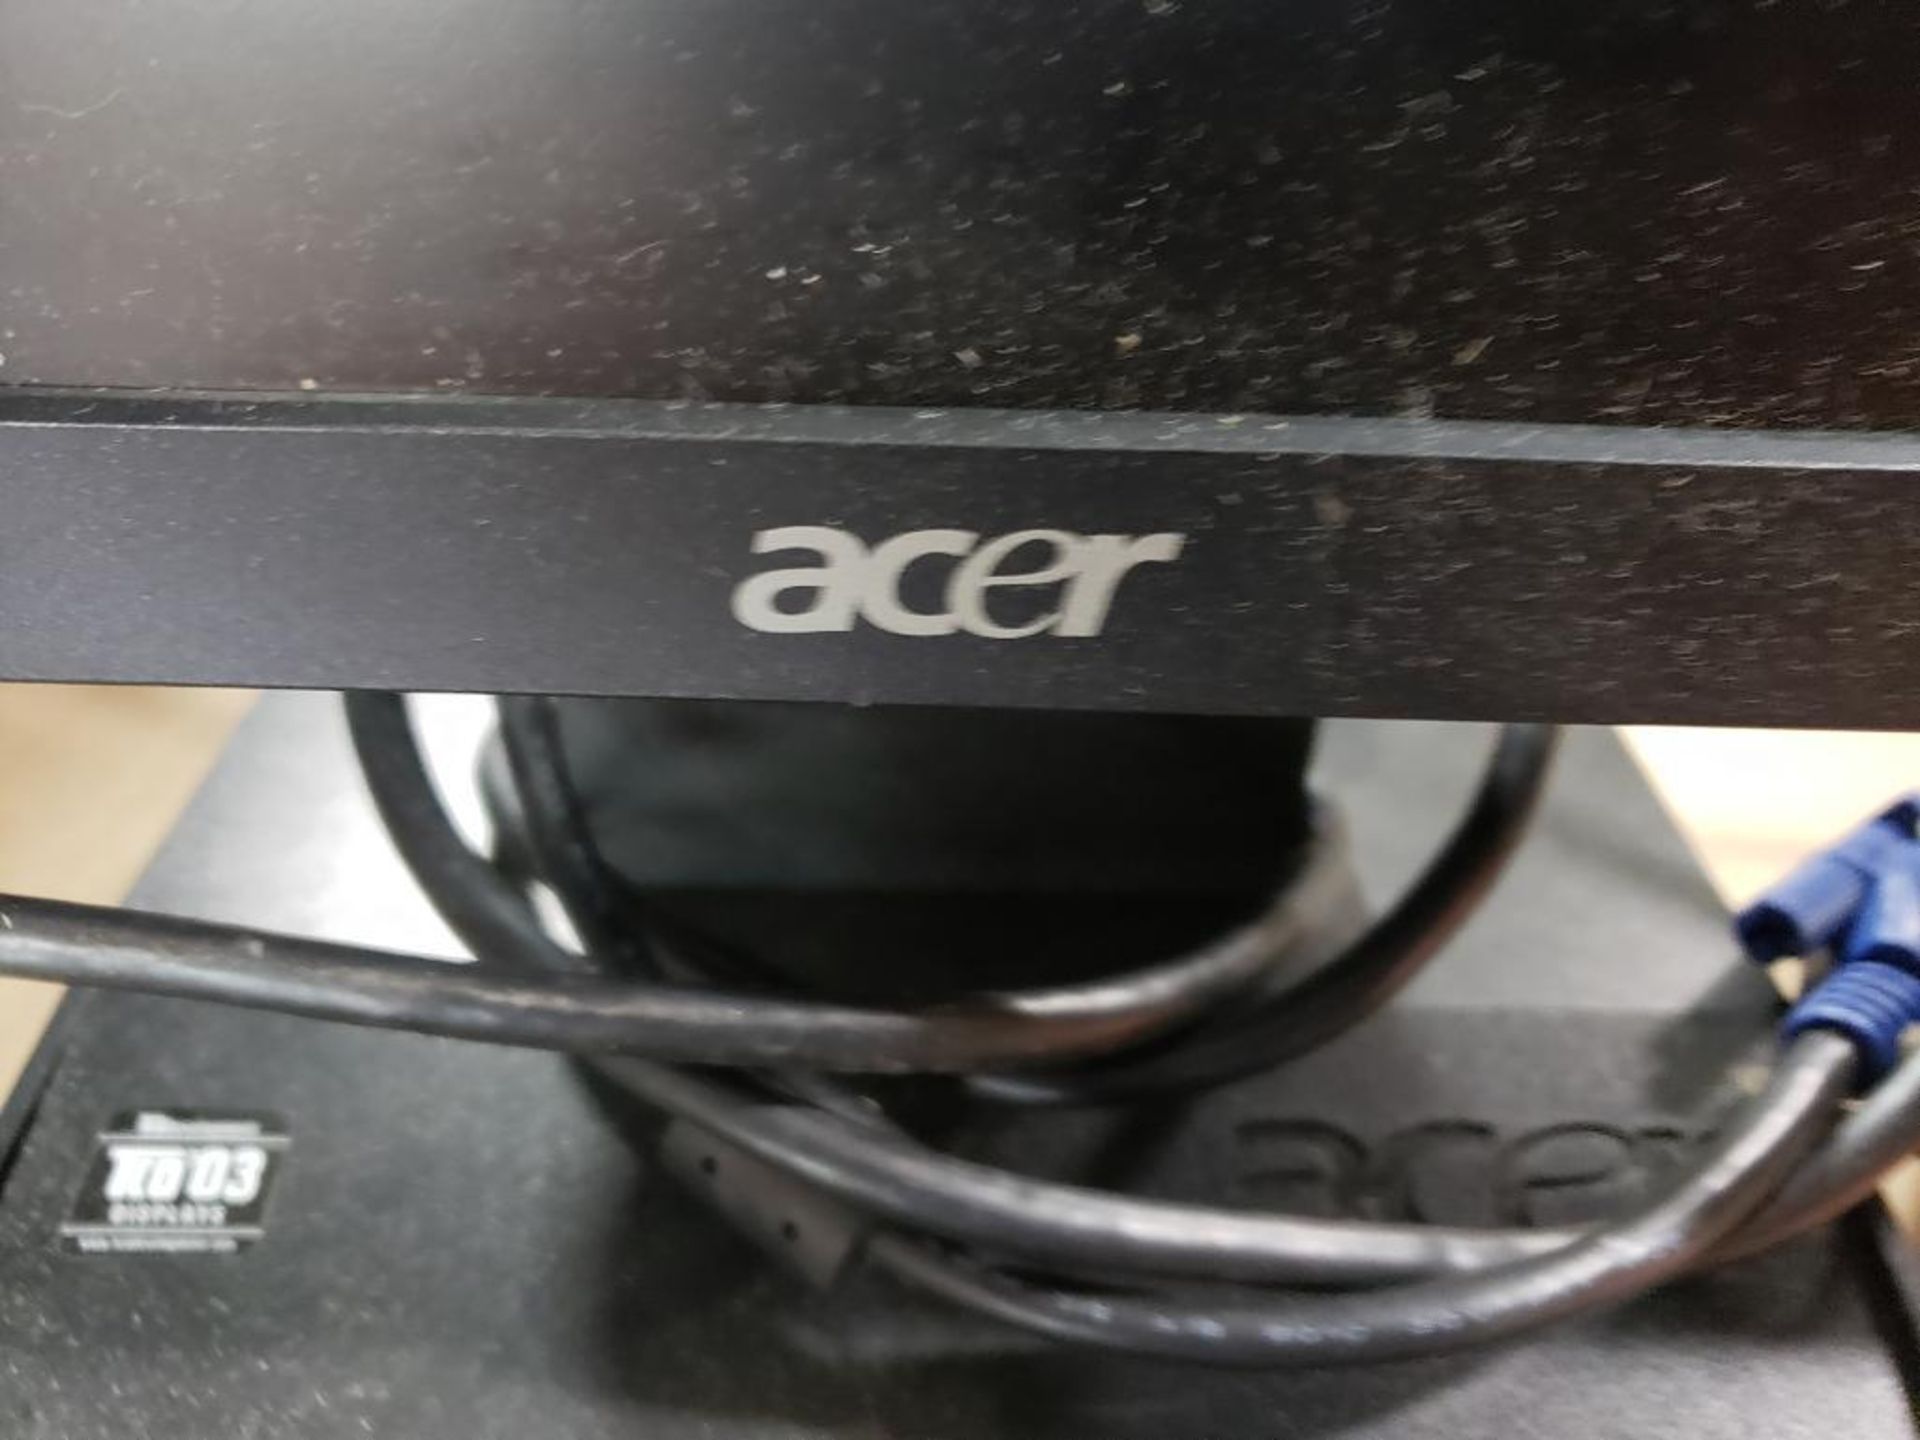 Qty 2 - Assorted PC monitors. ACER, HANNS-G. - Image 3 of 8